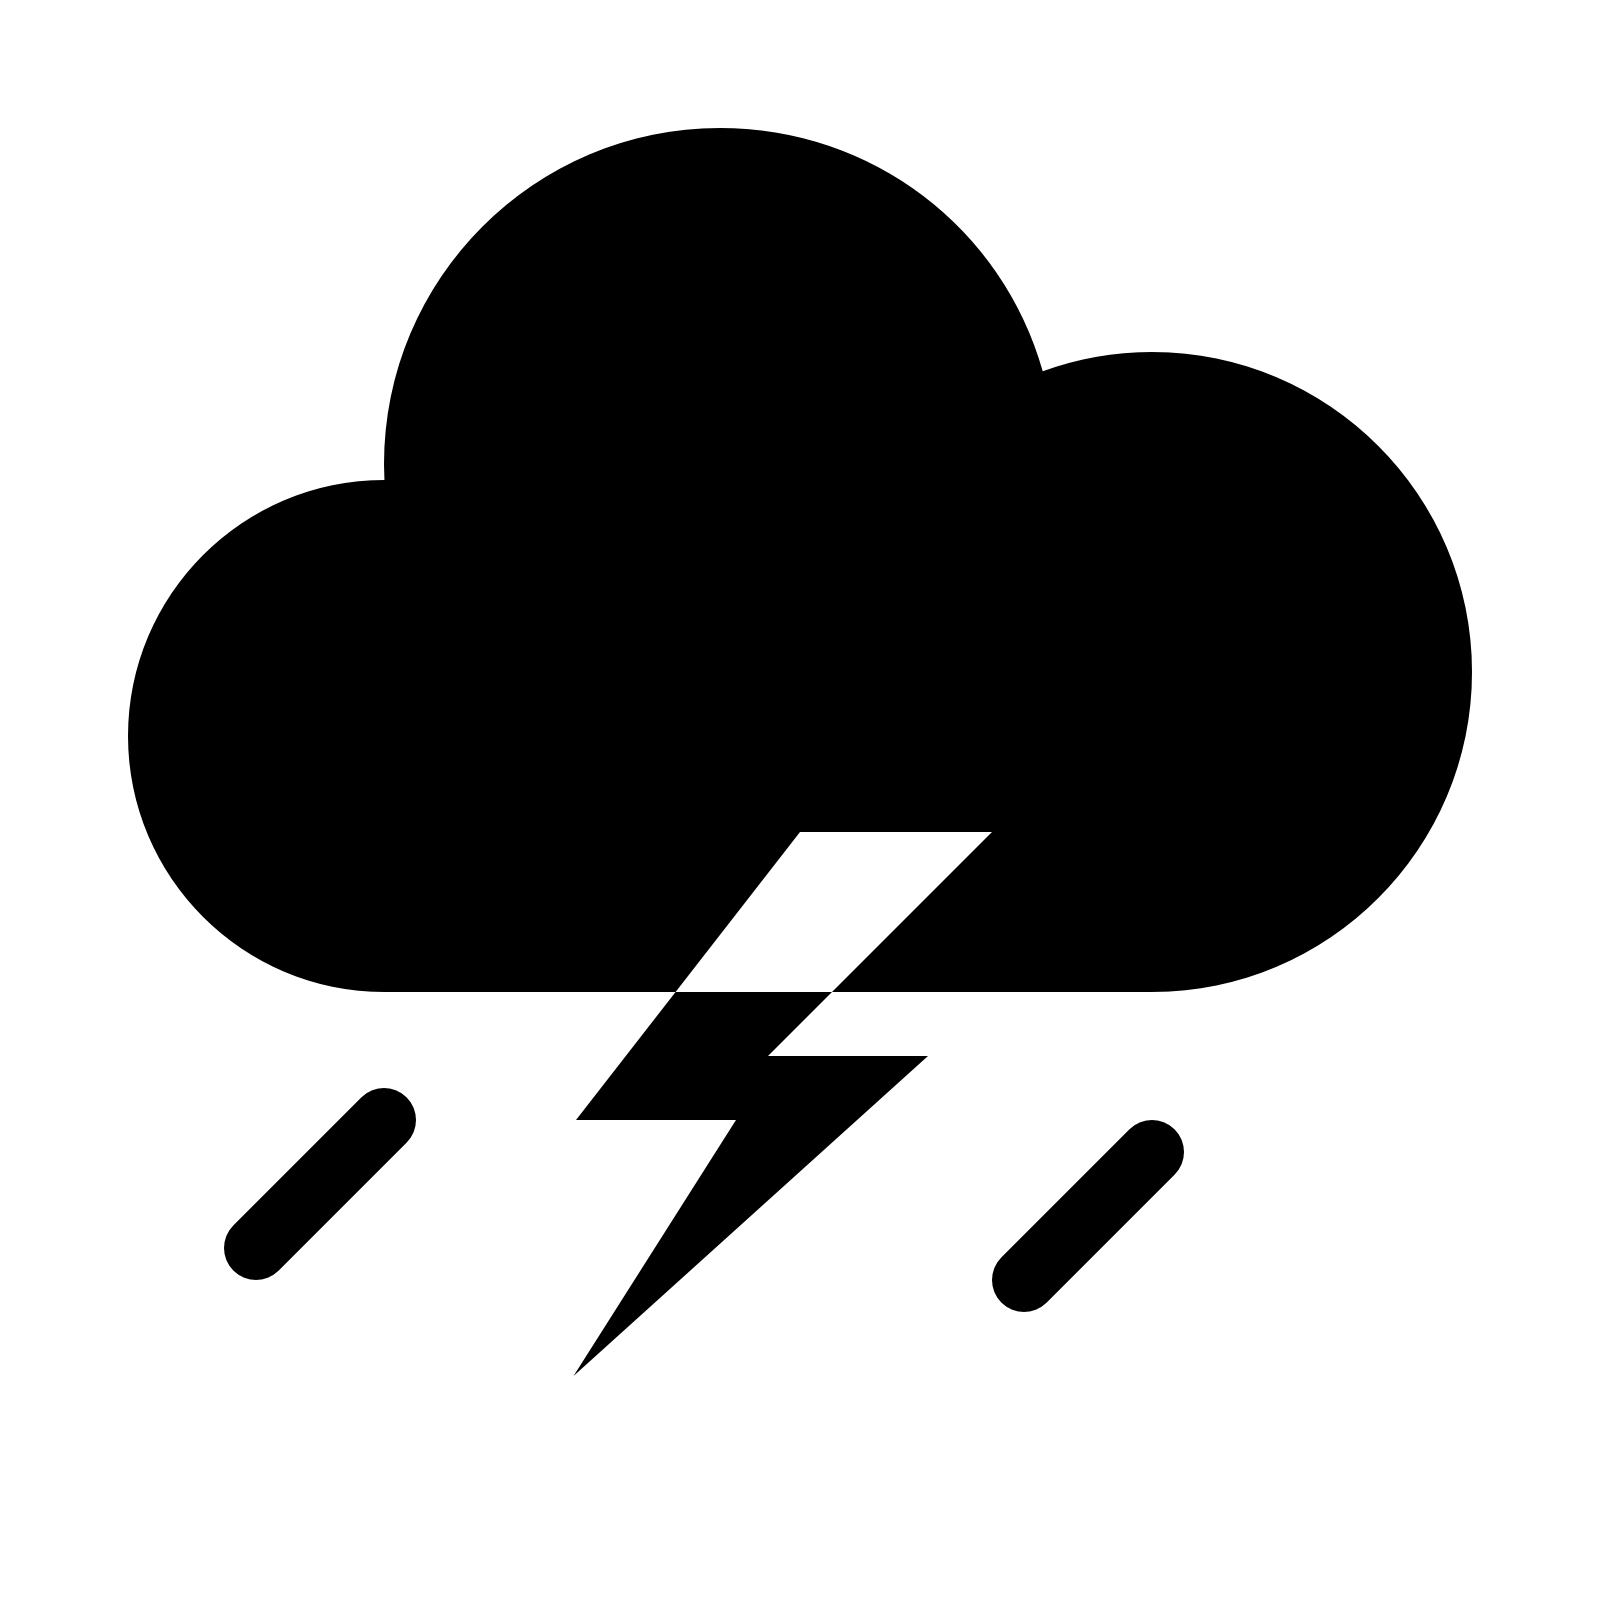 Thunder Icons - Download for Free at Icons8'